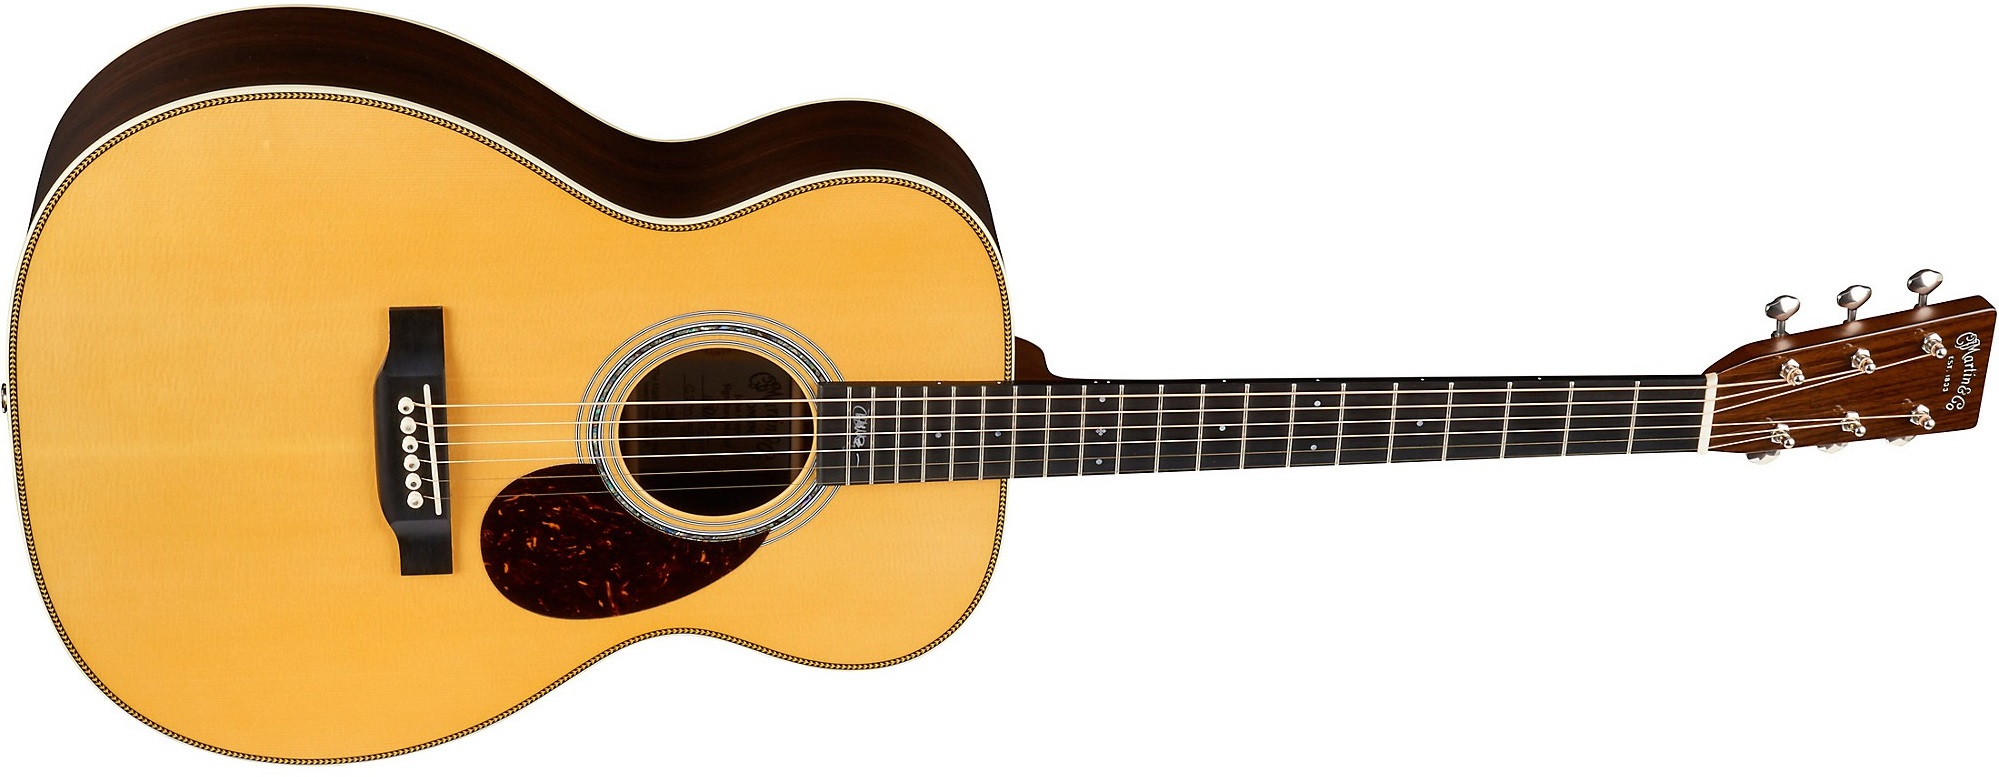 Martin OMJM John Mayer Acoustic-Electric Guitar on a white background